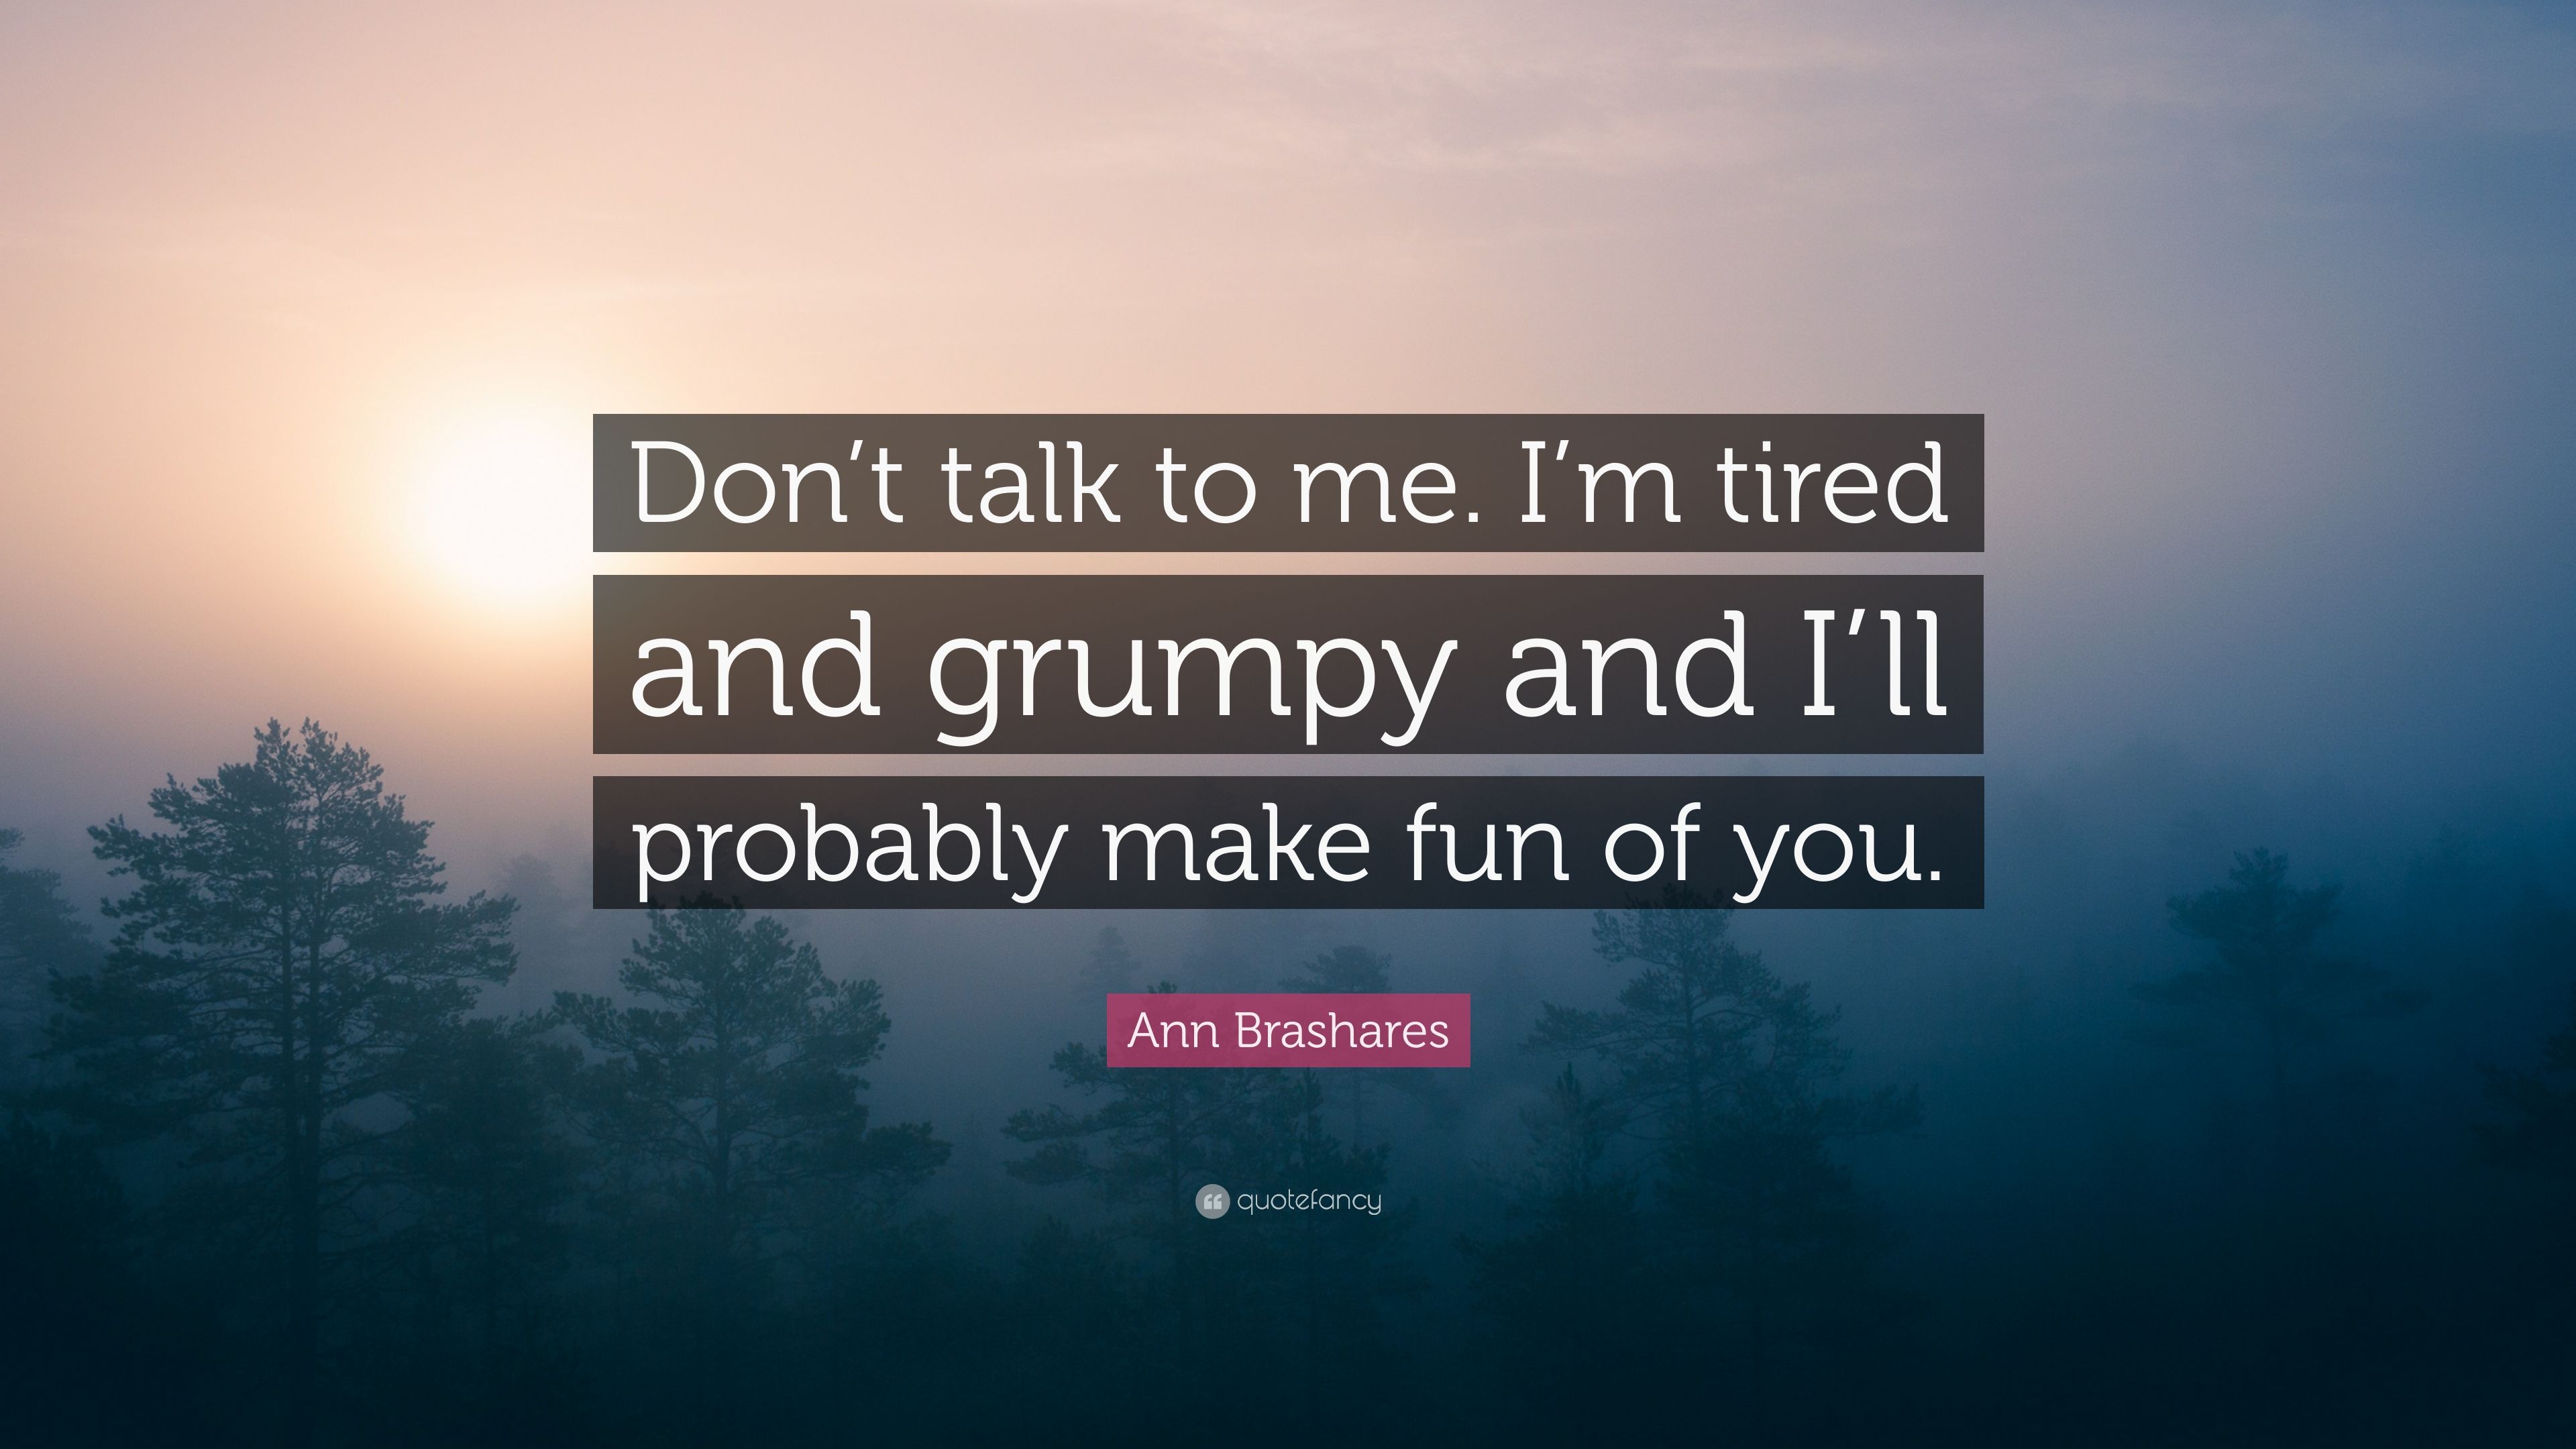 Ann Brashares Quote: “Don't talk to me. I'm tired and grumpy and I